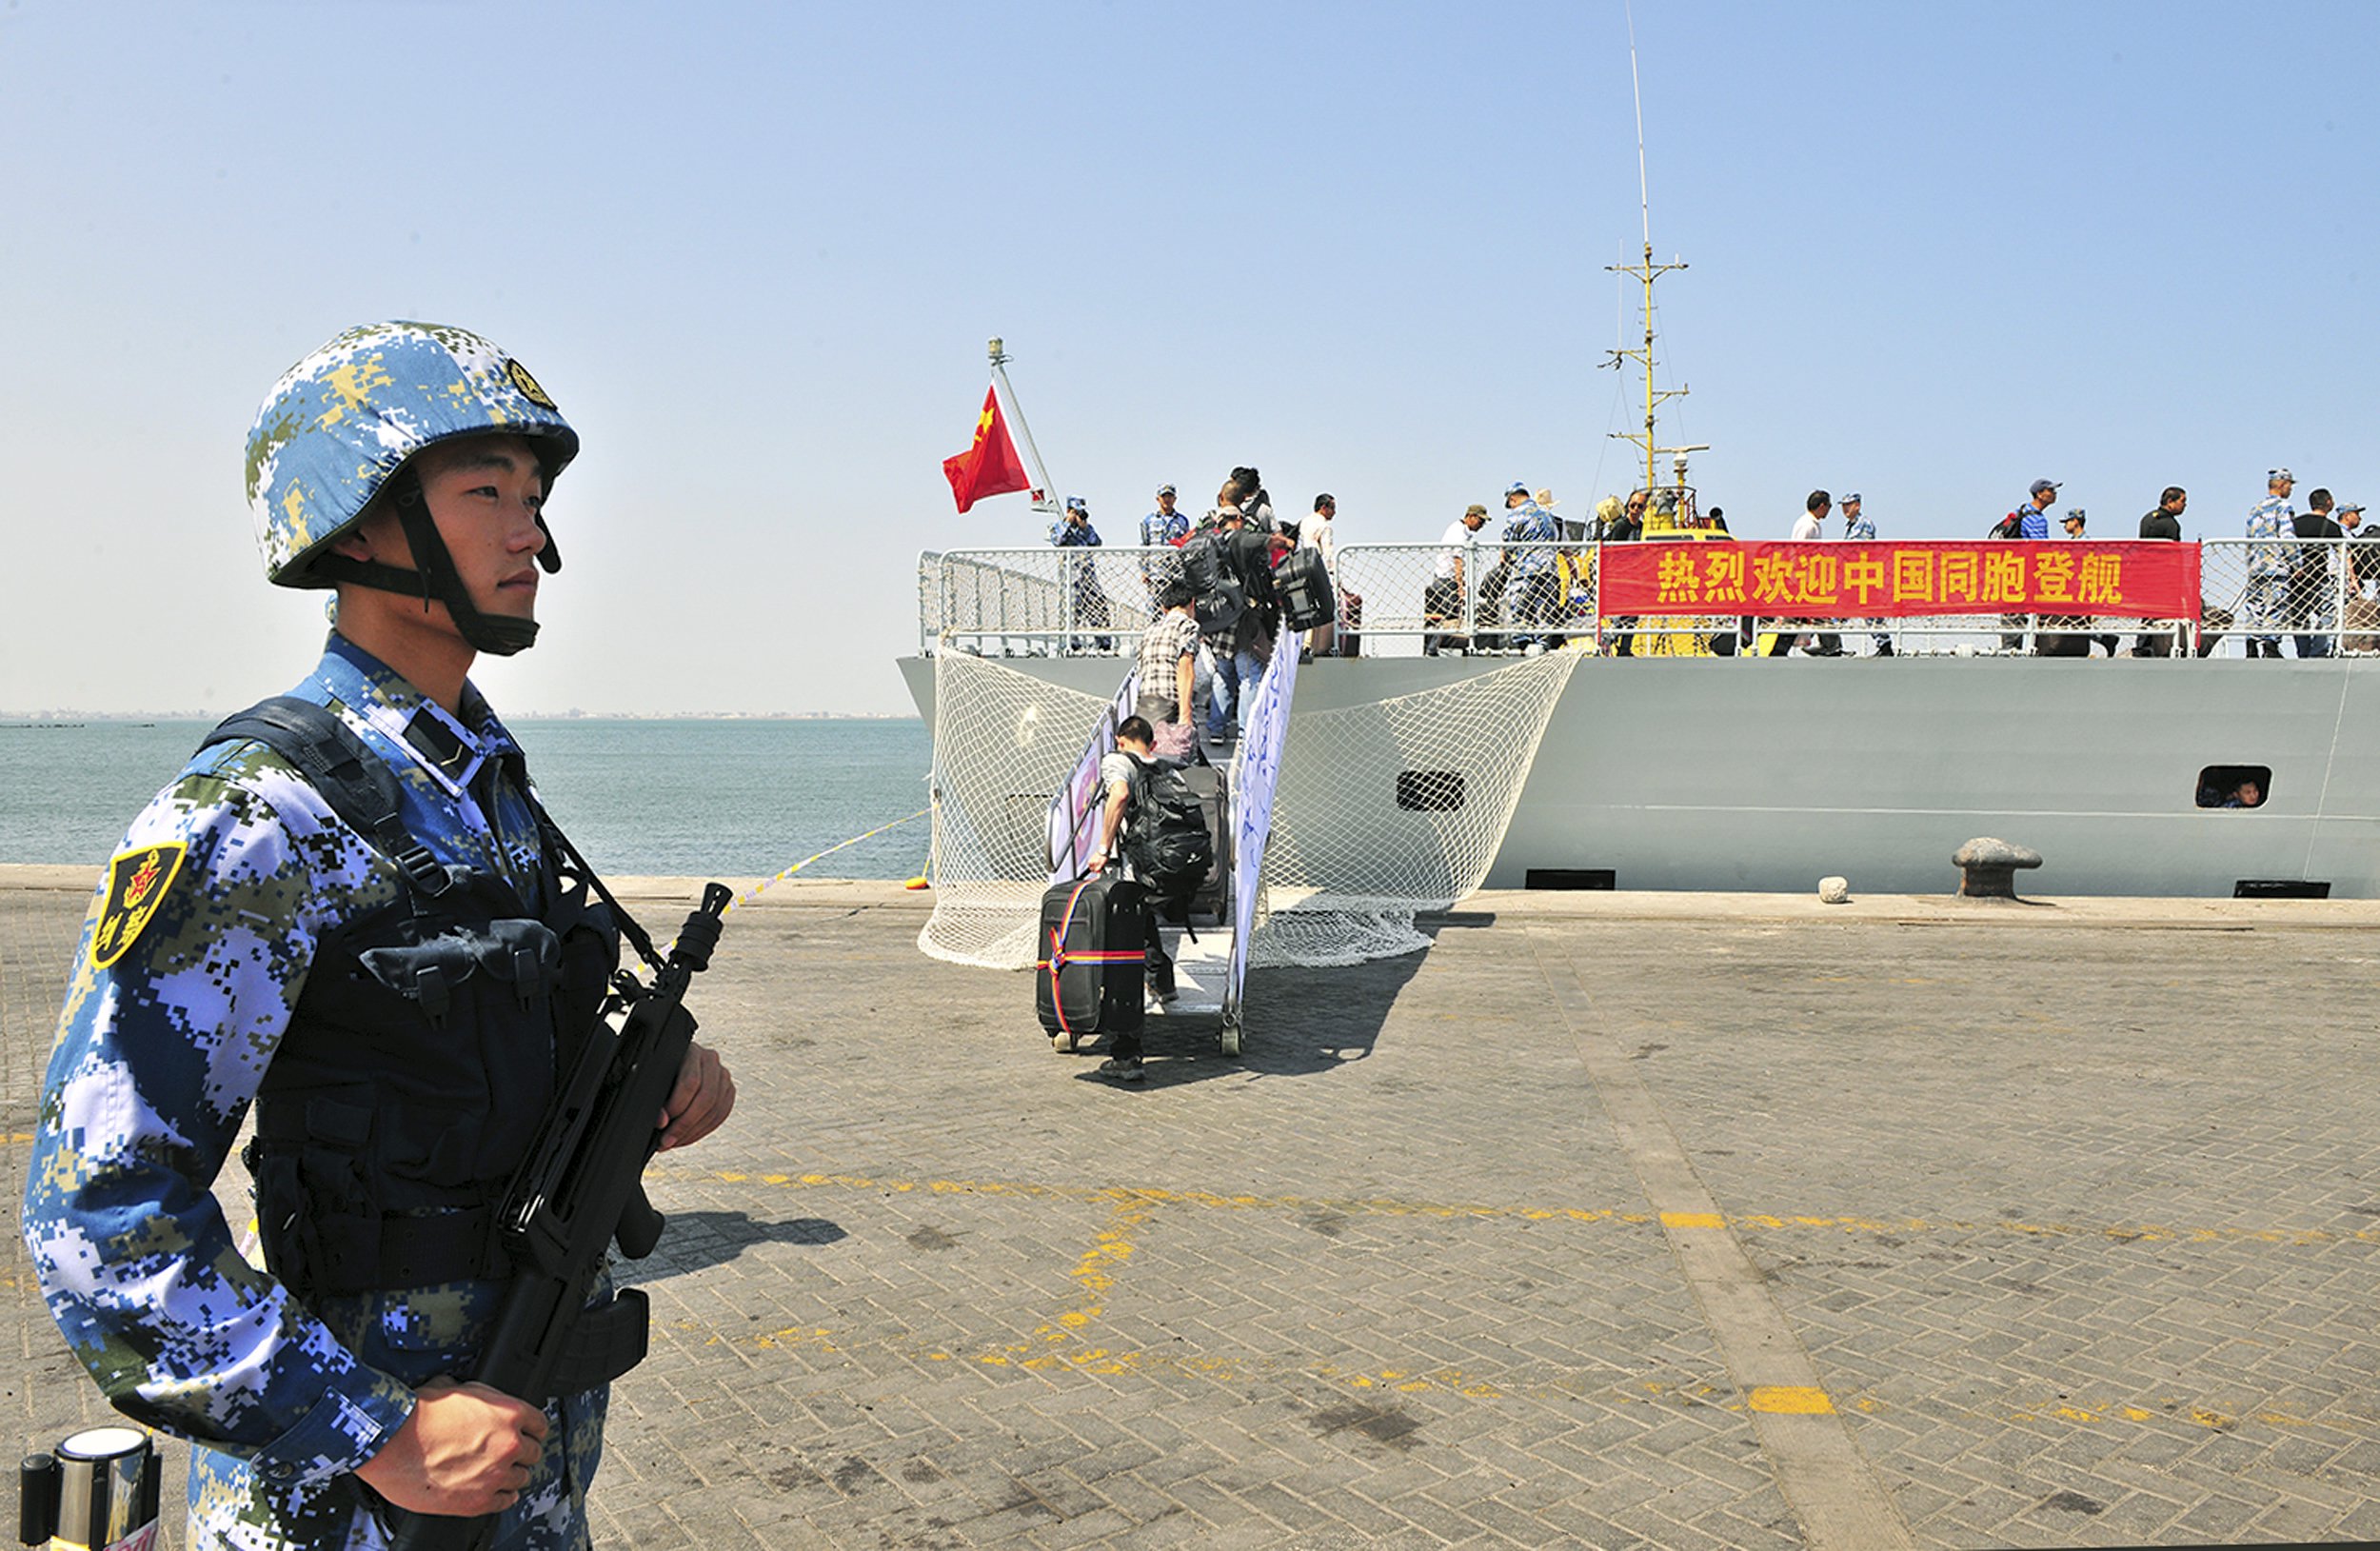 Chinese military base in Djibouti necessary to protect key trade routes  linking Asia, Africa, the Middle East and Europe | South China Morning Post